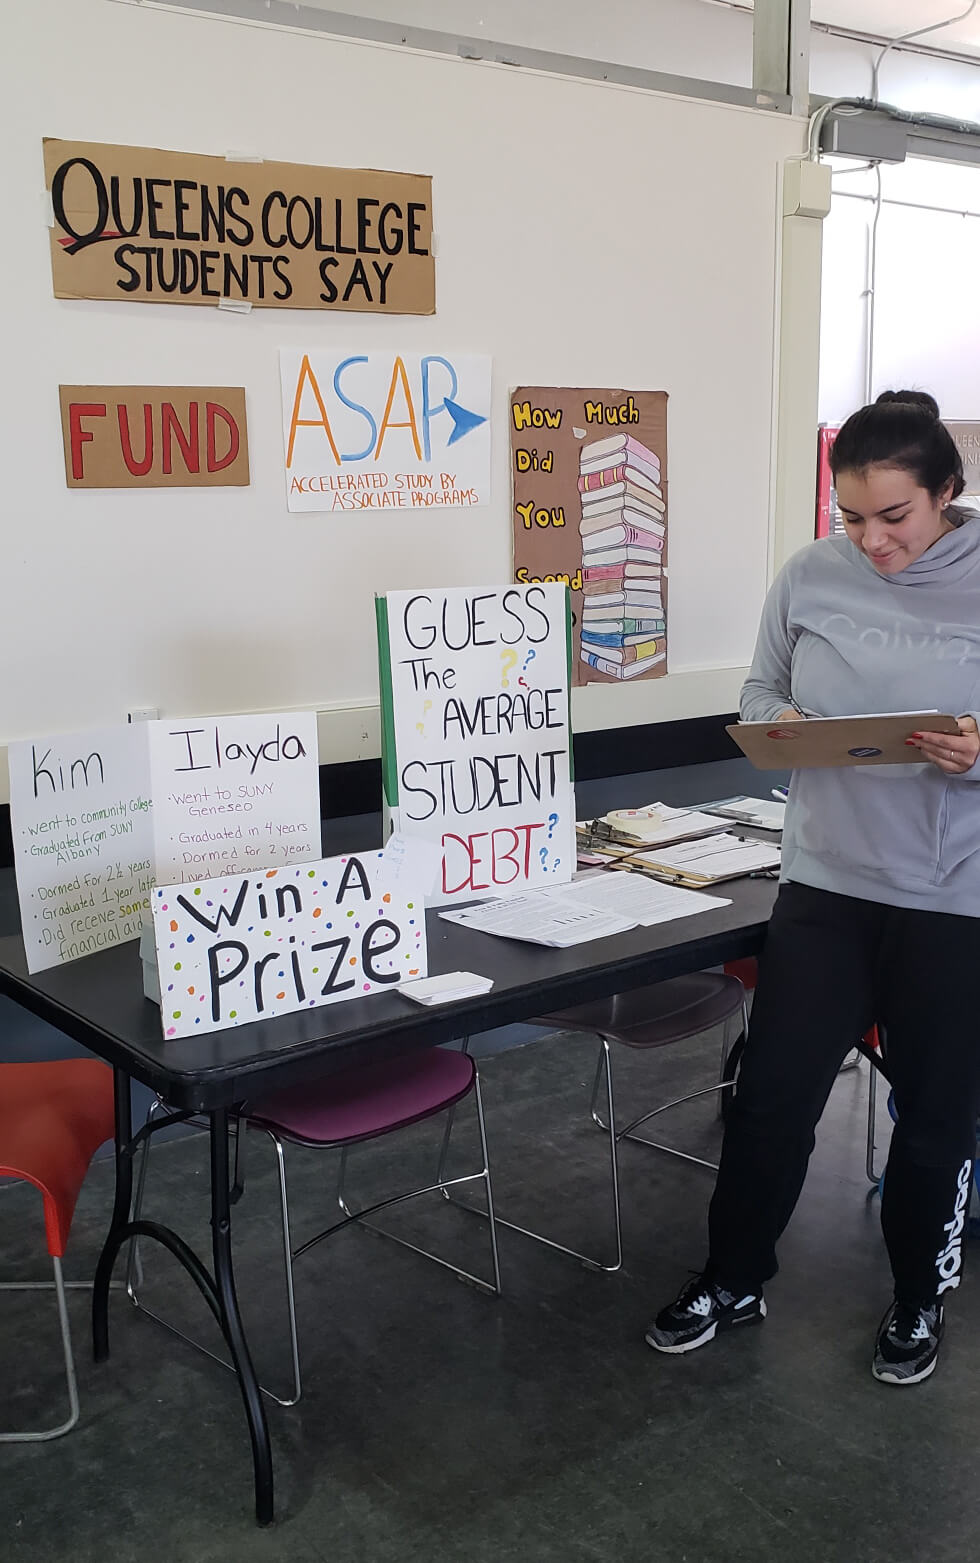 Fund Cuny Asap City College Students Across Queens Call For More